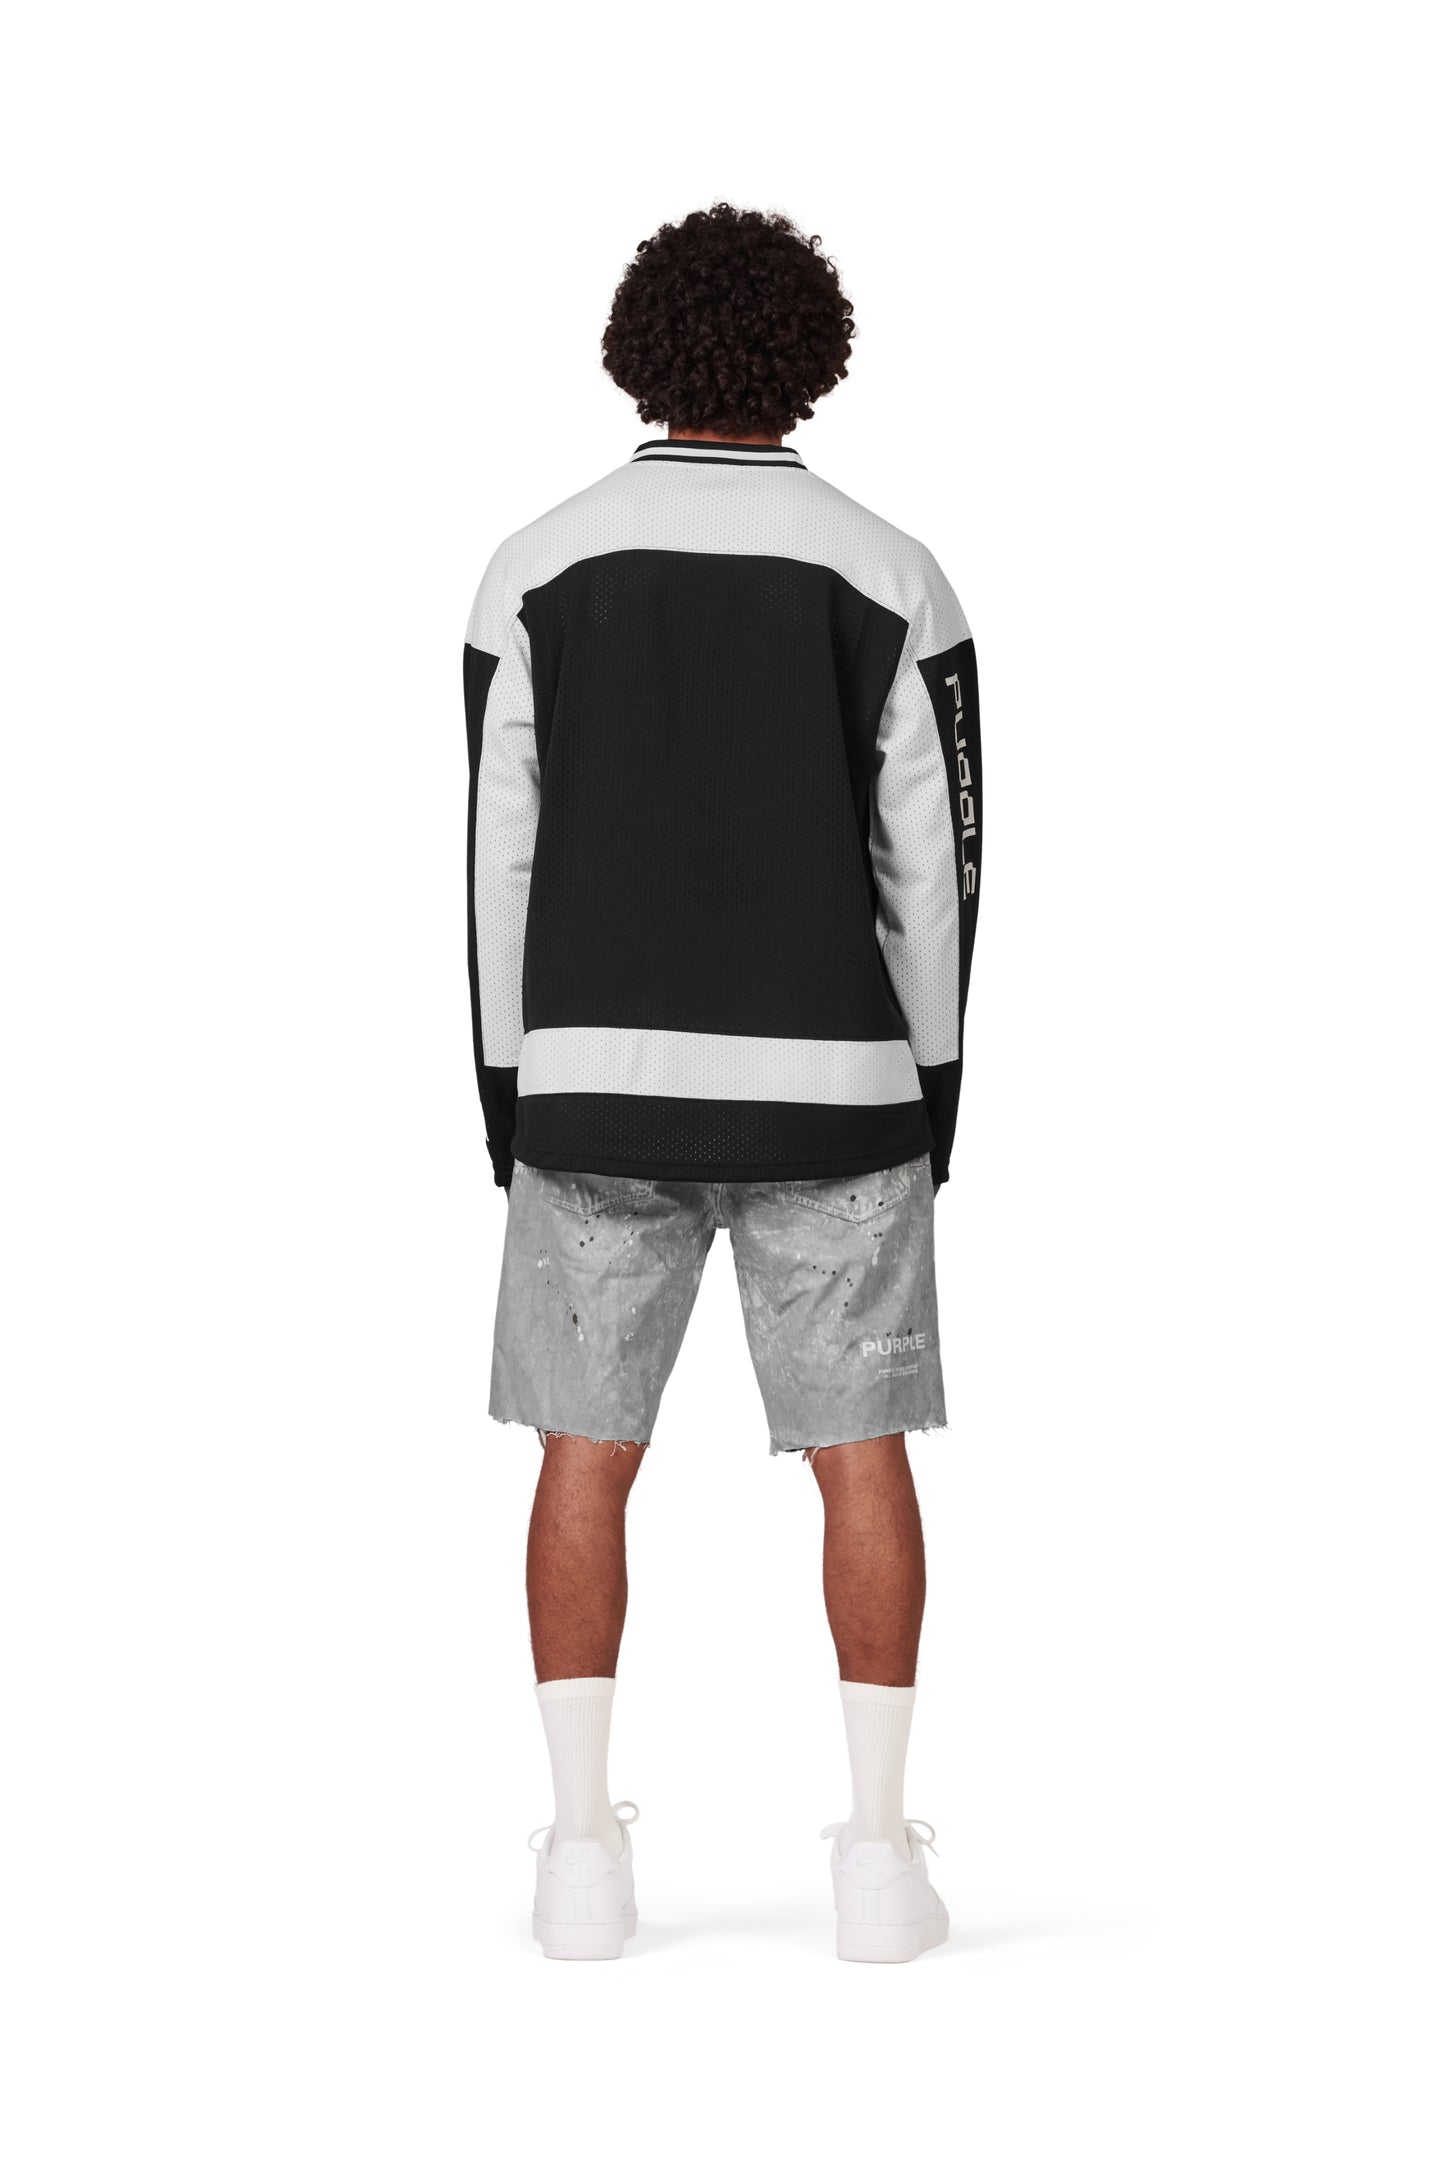 P206 ATHLETIC JERSEY - Black and White